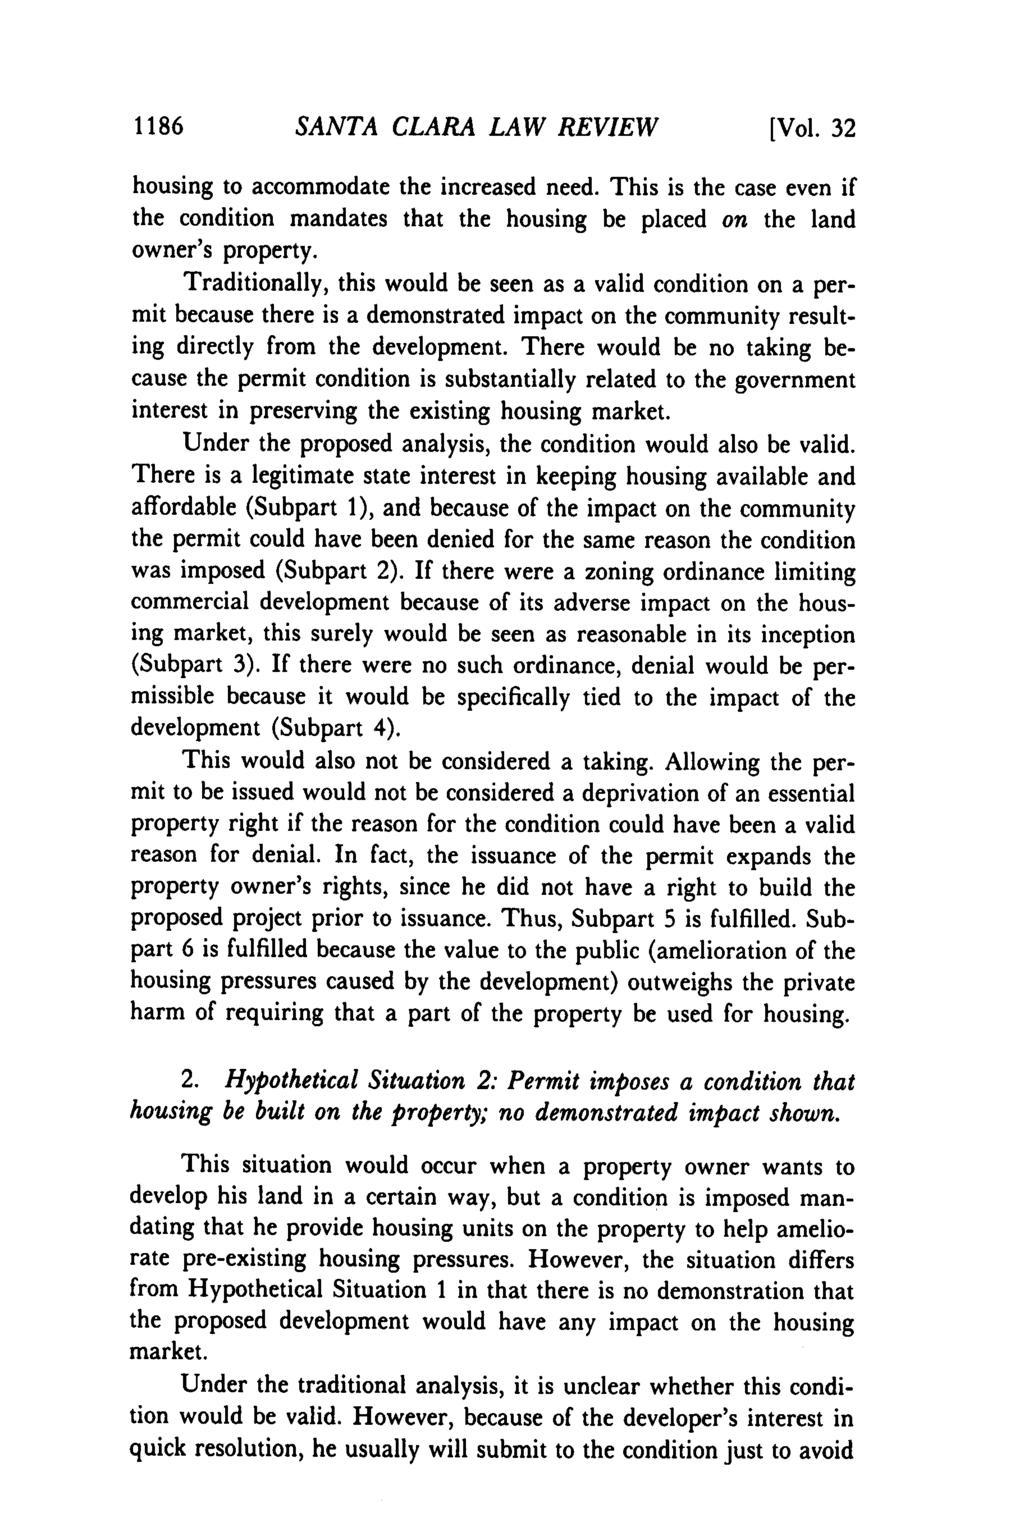 1186 SANTA CLARA LAW REVIEW [Vol. 32 housing to accommodate the increased need. This is the case even if the condition mandates that the housing be placed on the land owner's property.